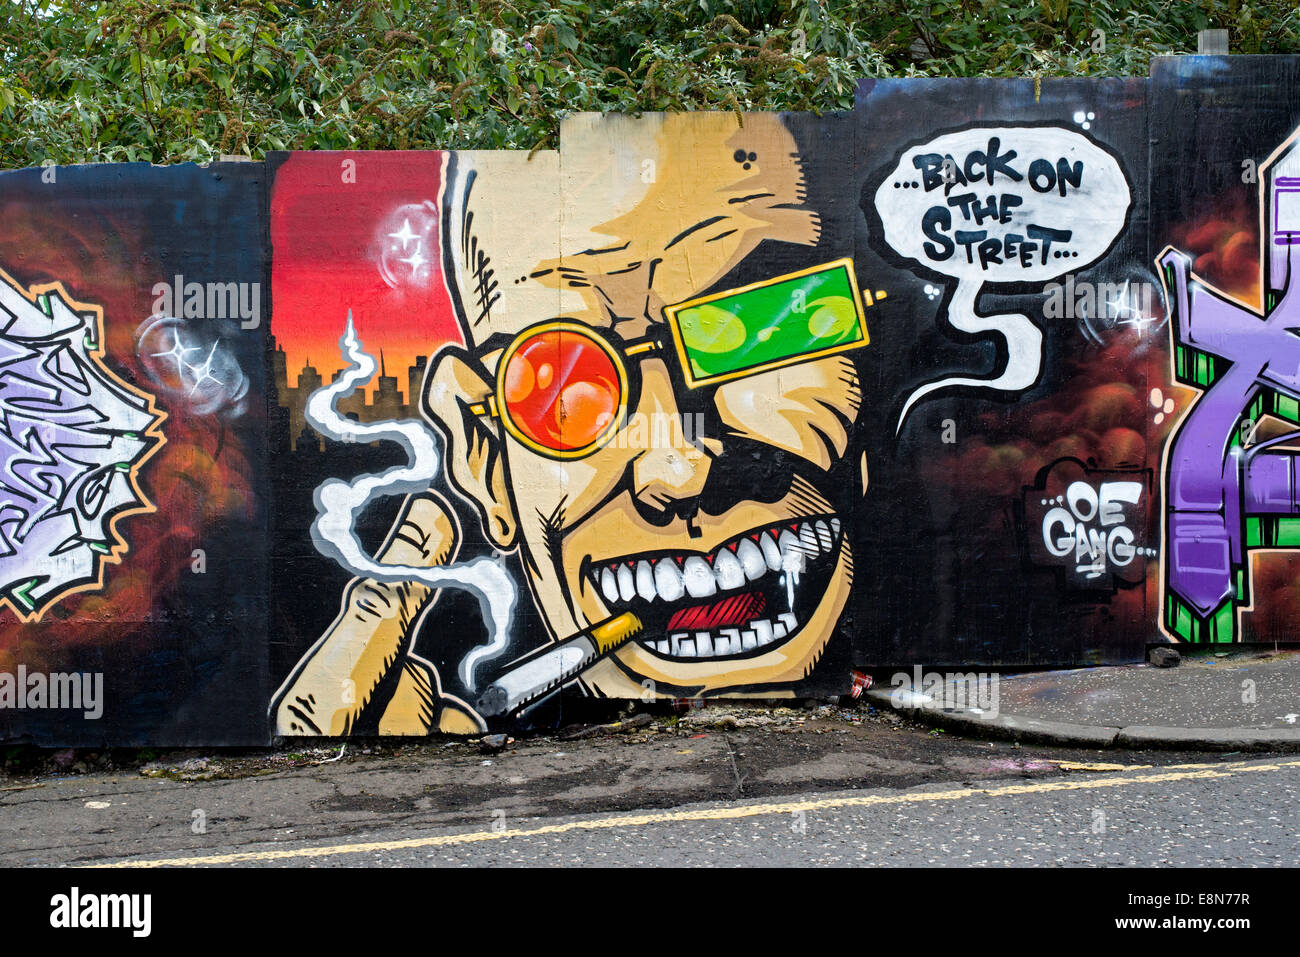 Graffiti depicting Spider Jerusalem, a fictional character and protagonist of the comic book Transmetropolitan. Stock Photo